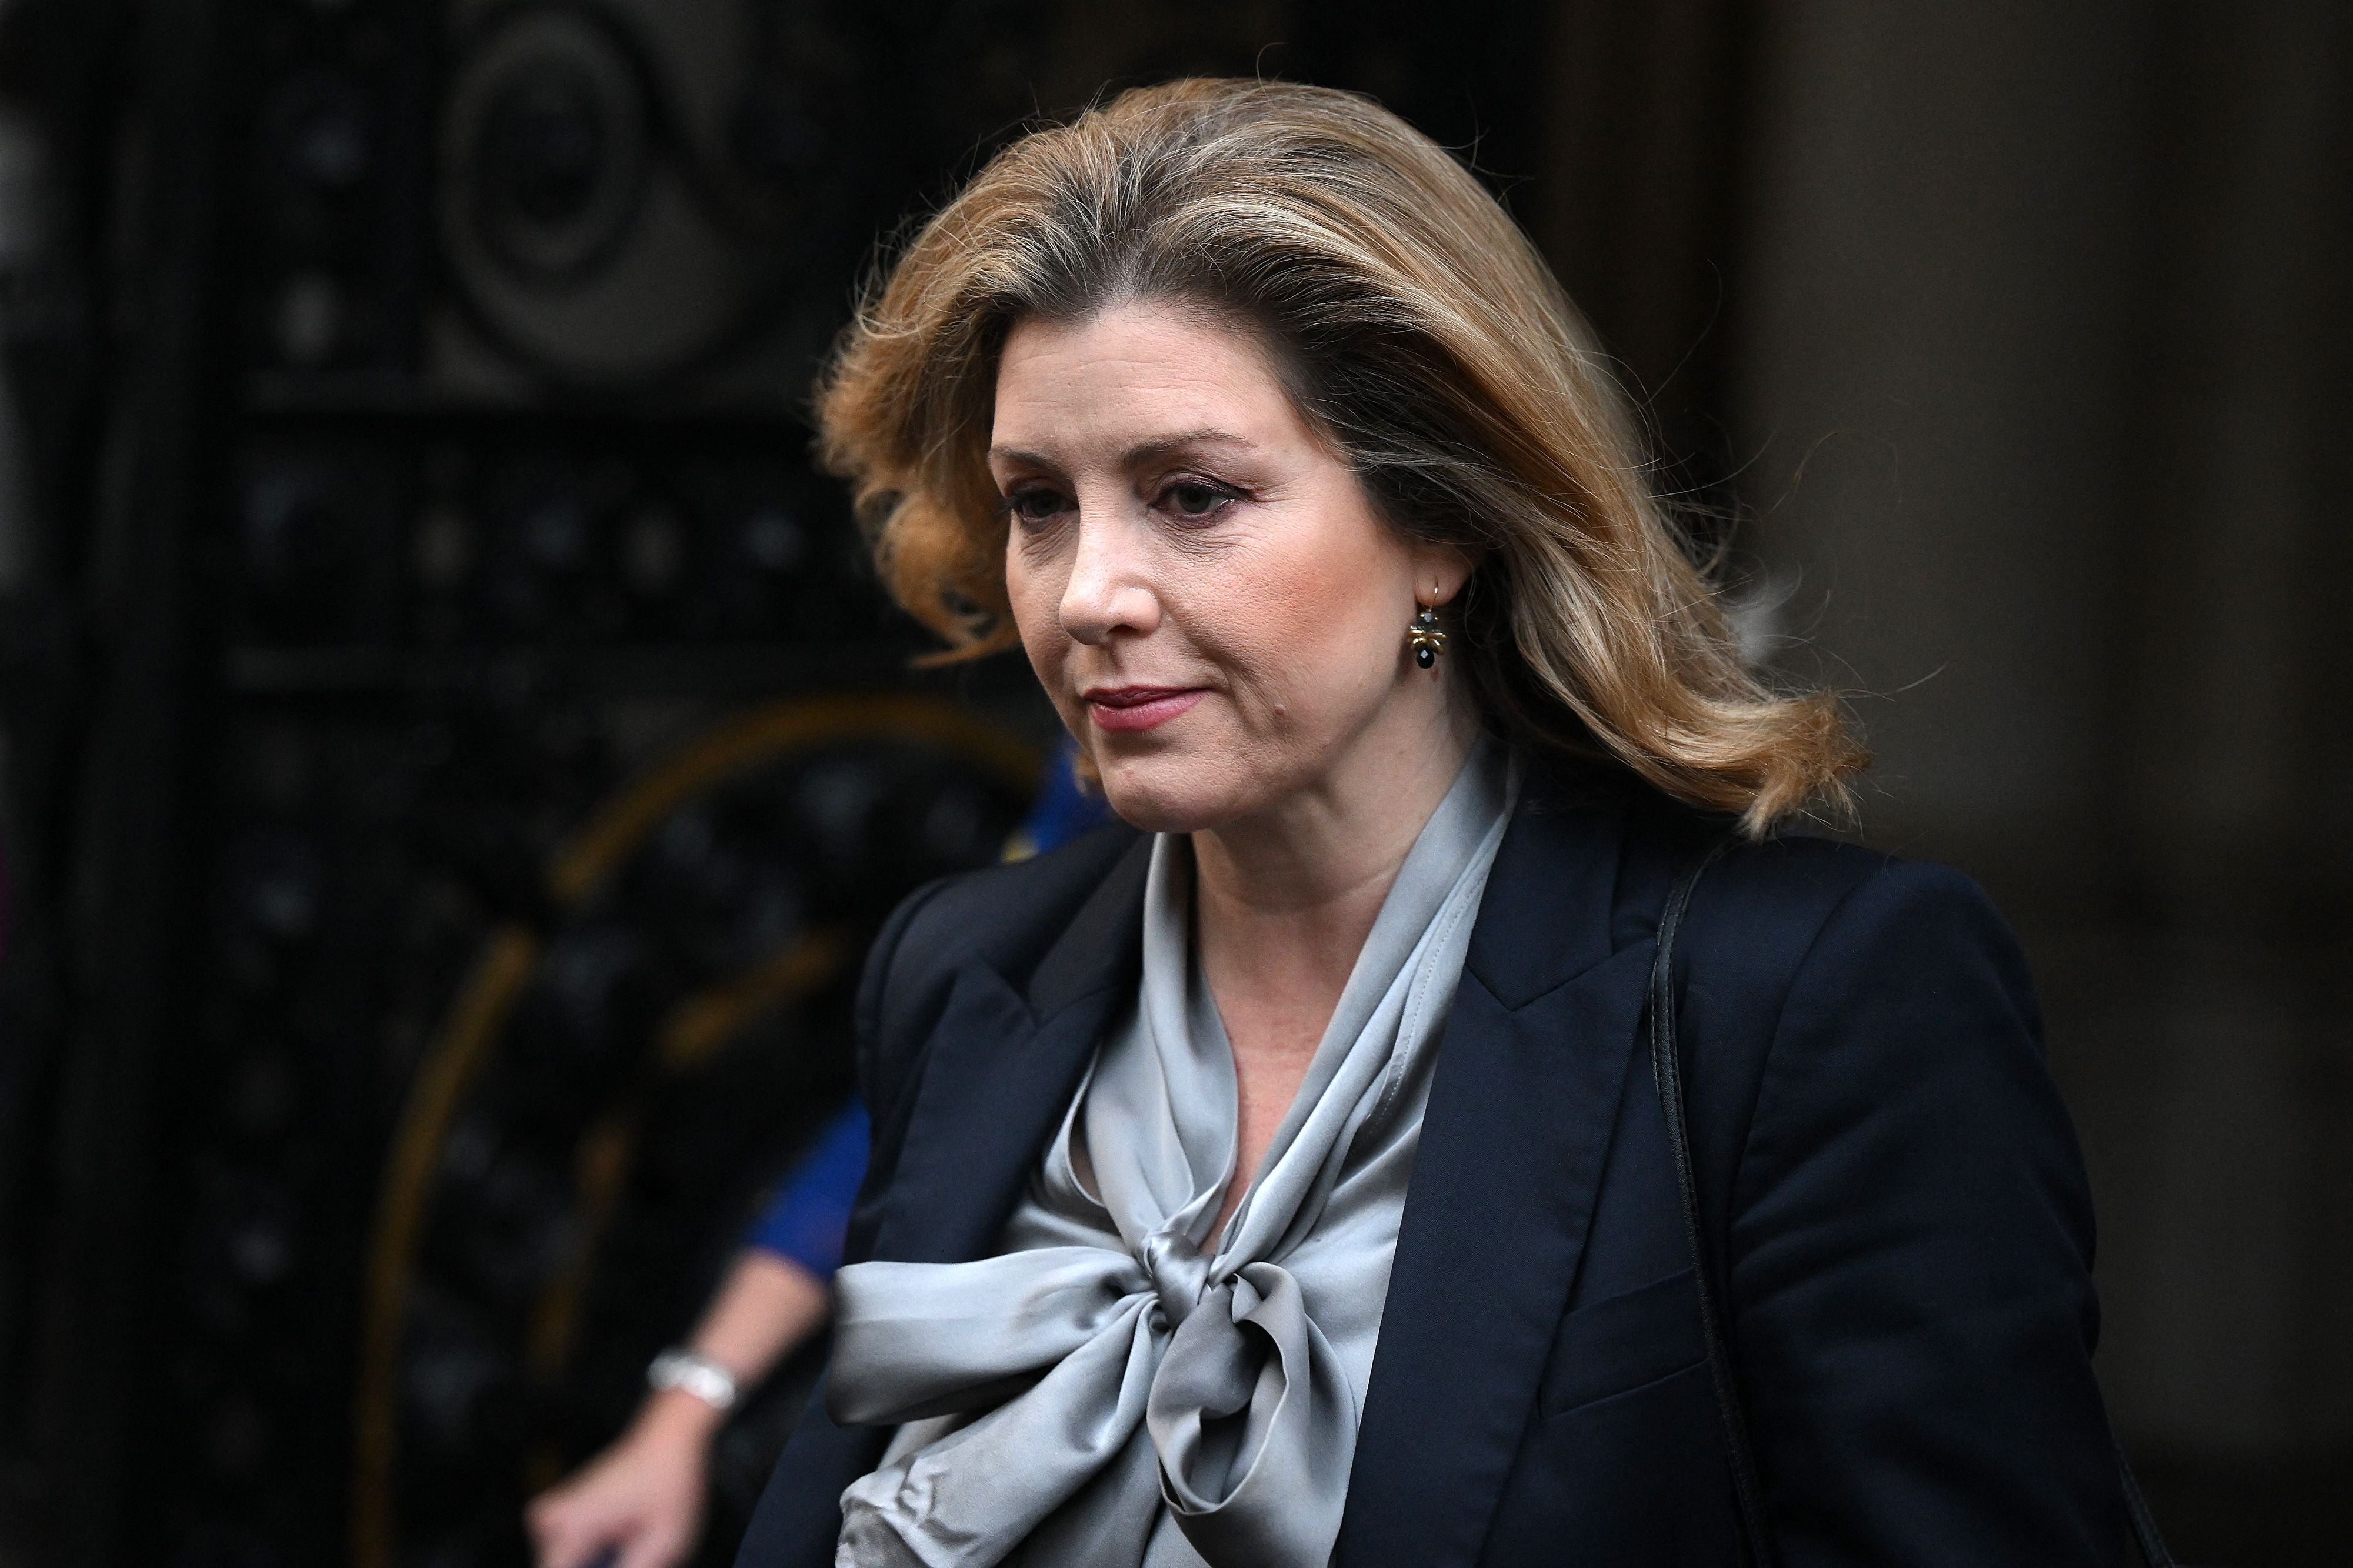 Commons leader Penny Mordaunt promised bill would pass finals stages in House next week